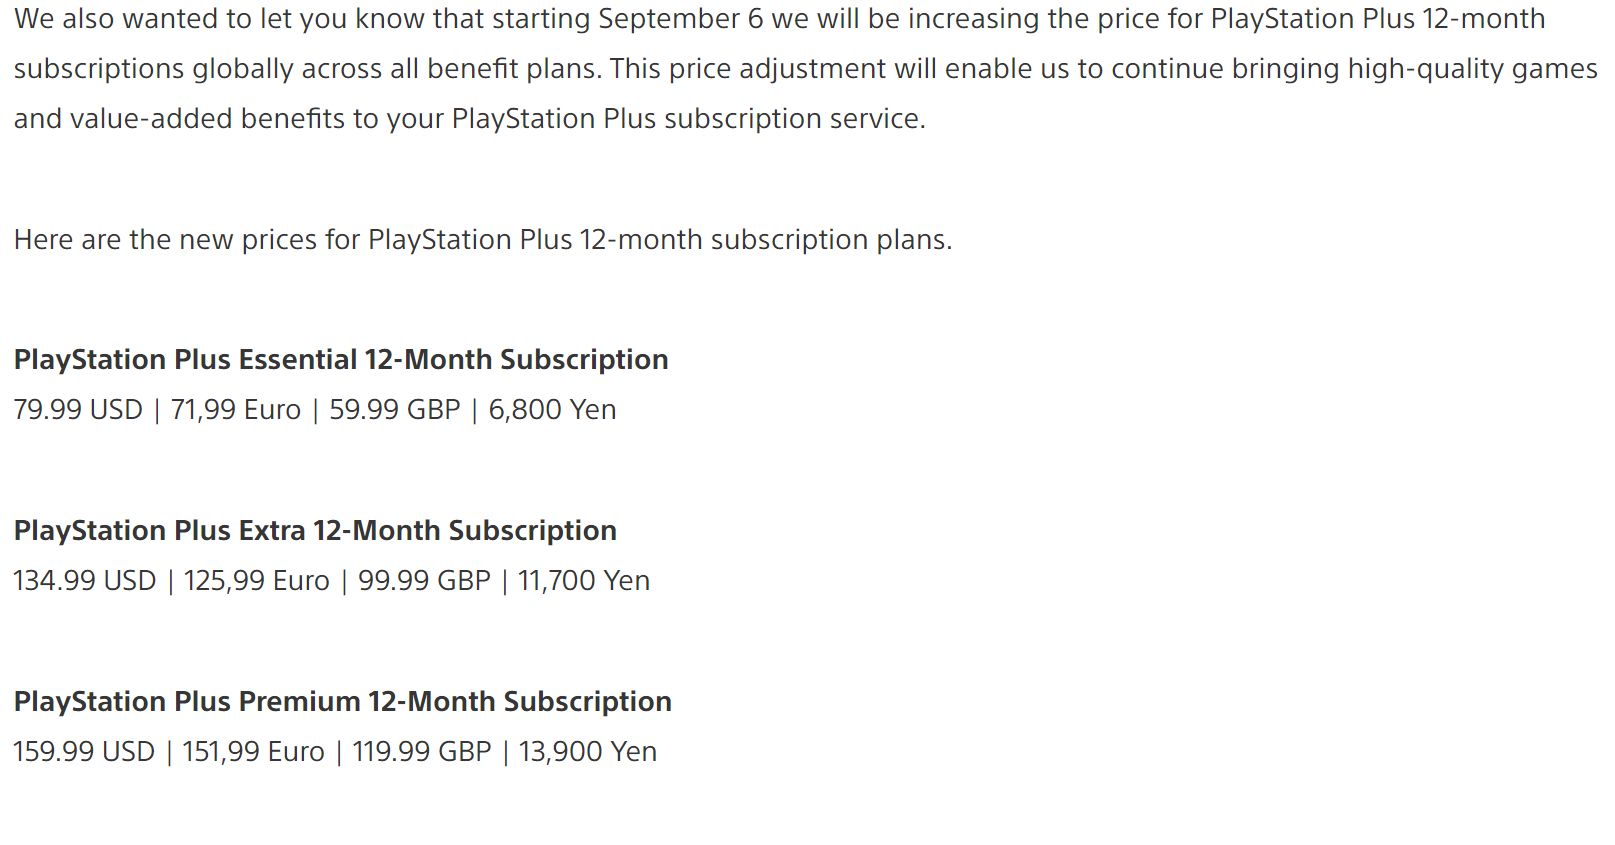 PlayStation Plus Subscription Price Will Increase in September